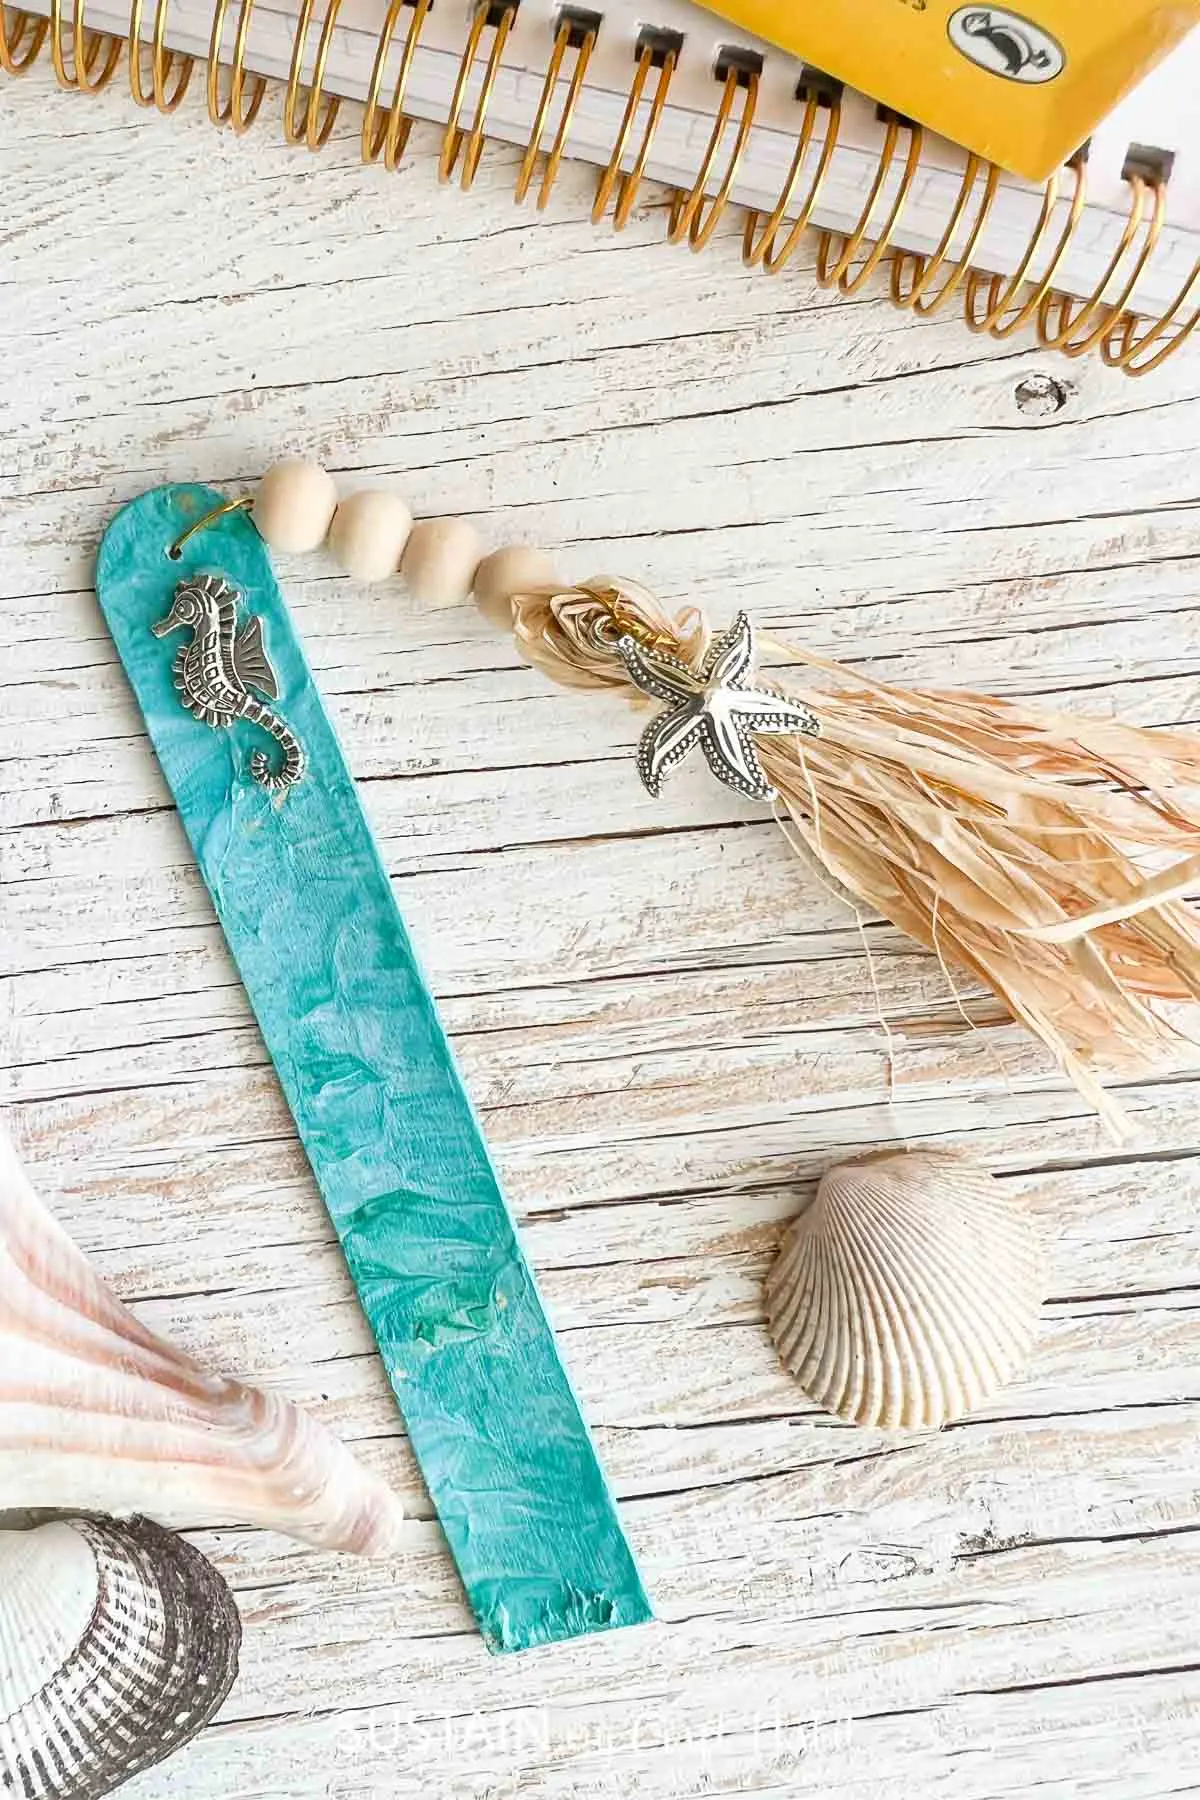 Paint poured beachy bookmark made with beach charms, wood beads and a tassel.